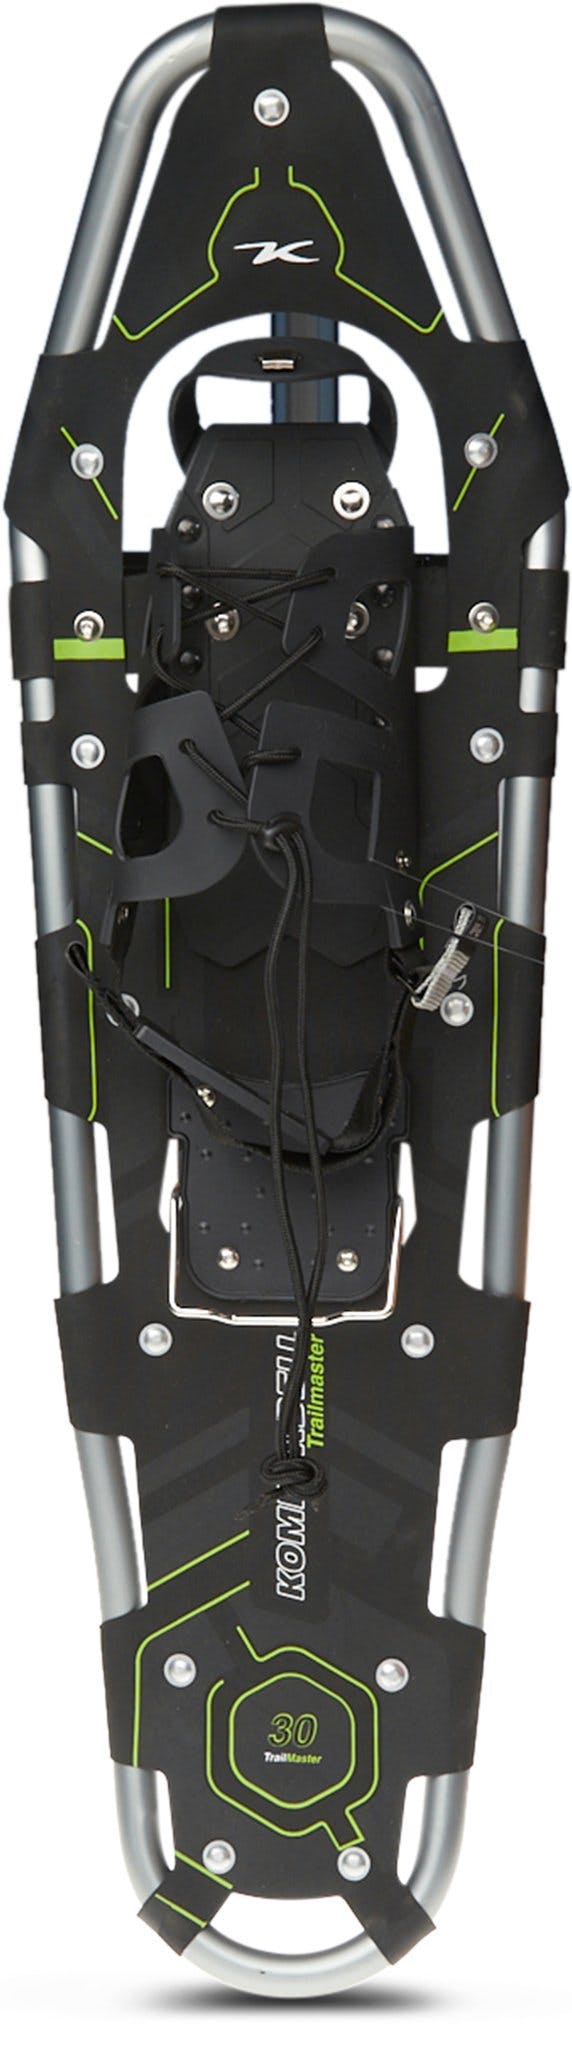 Product image for Trailmaster Snowshoe 30 in - Unisex